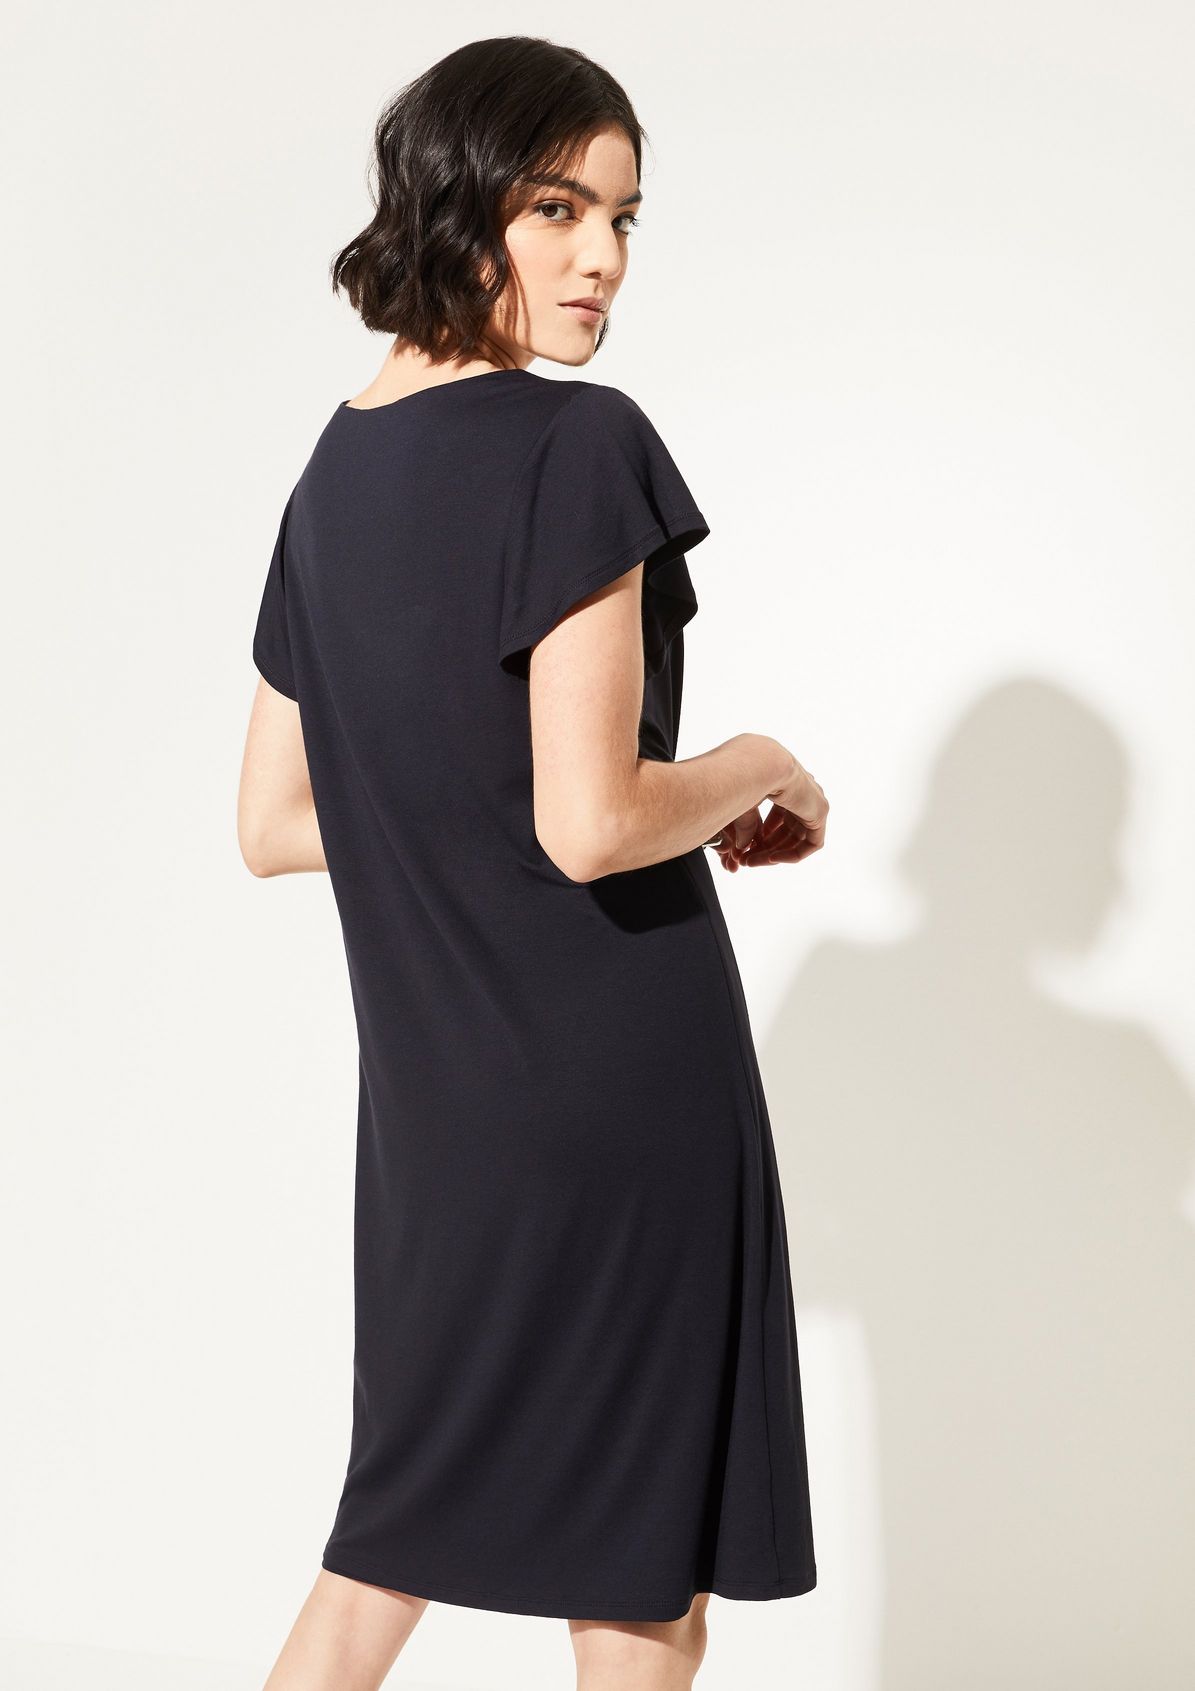 Dress with flounce sleeves from comma